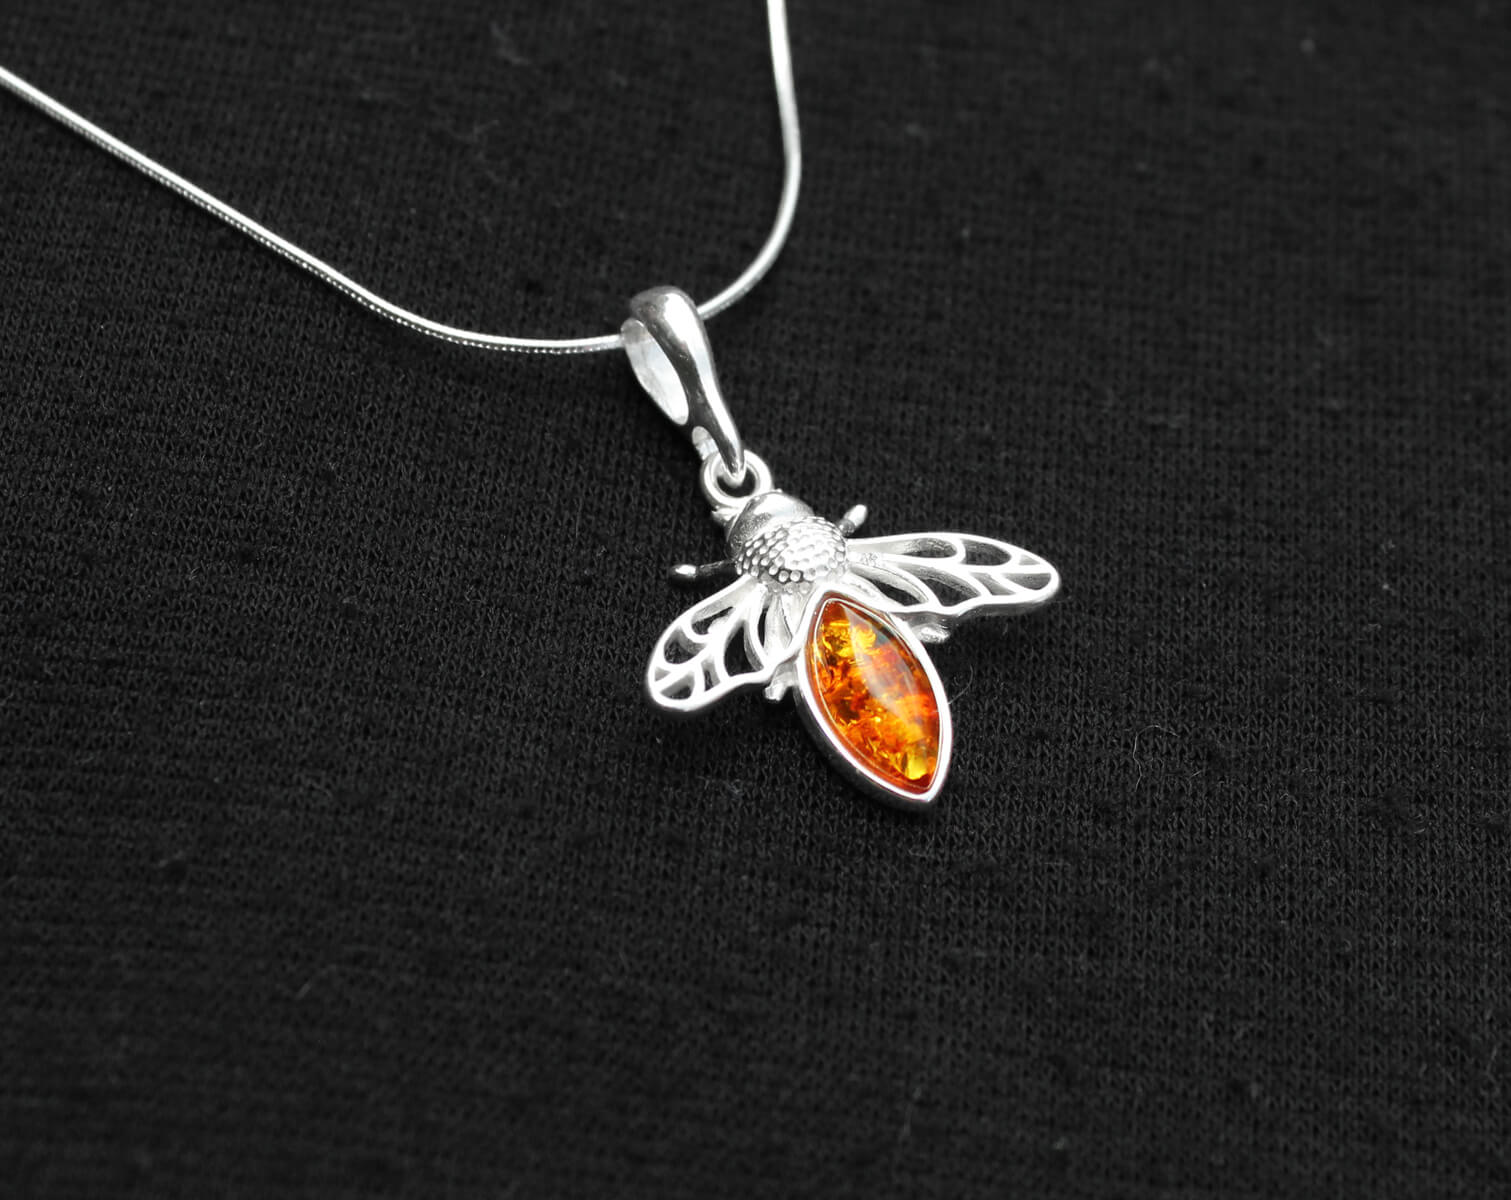 Medium Amber Bee Necklace | The Manchester Shop